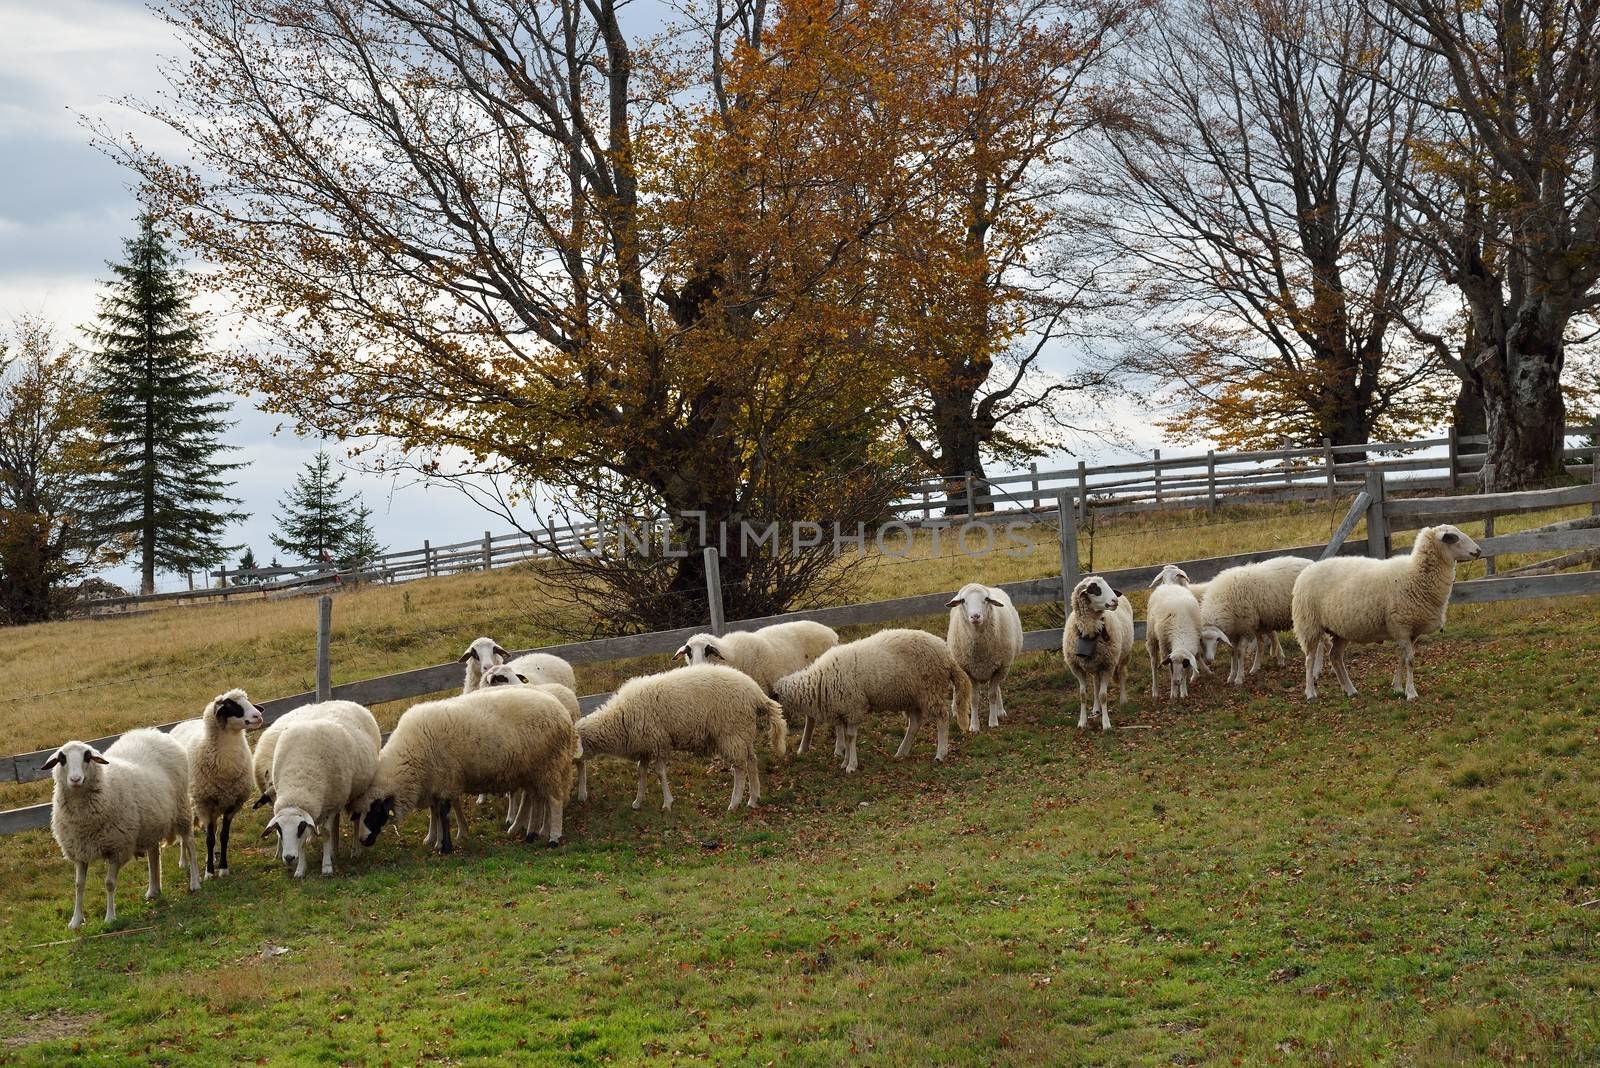 Group of Sheep on a Pasture in Mountain